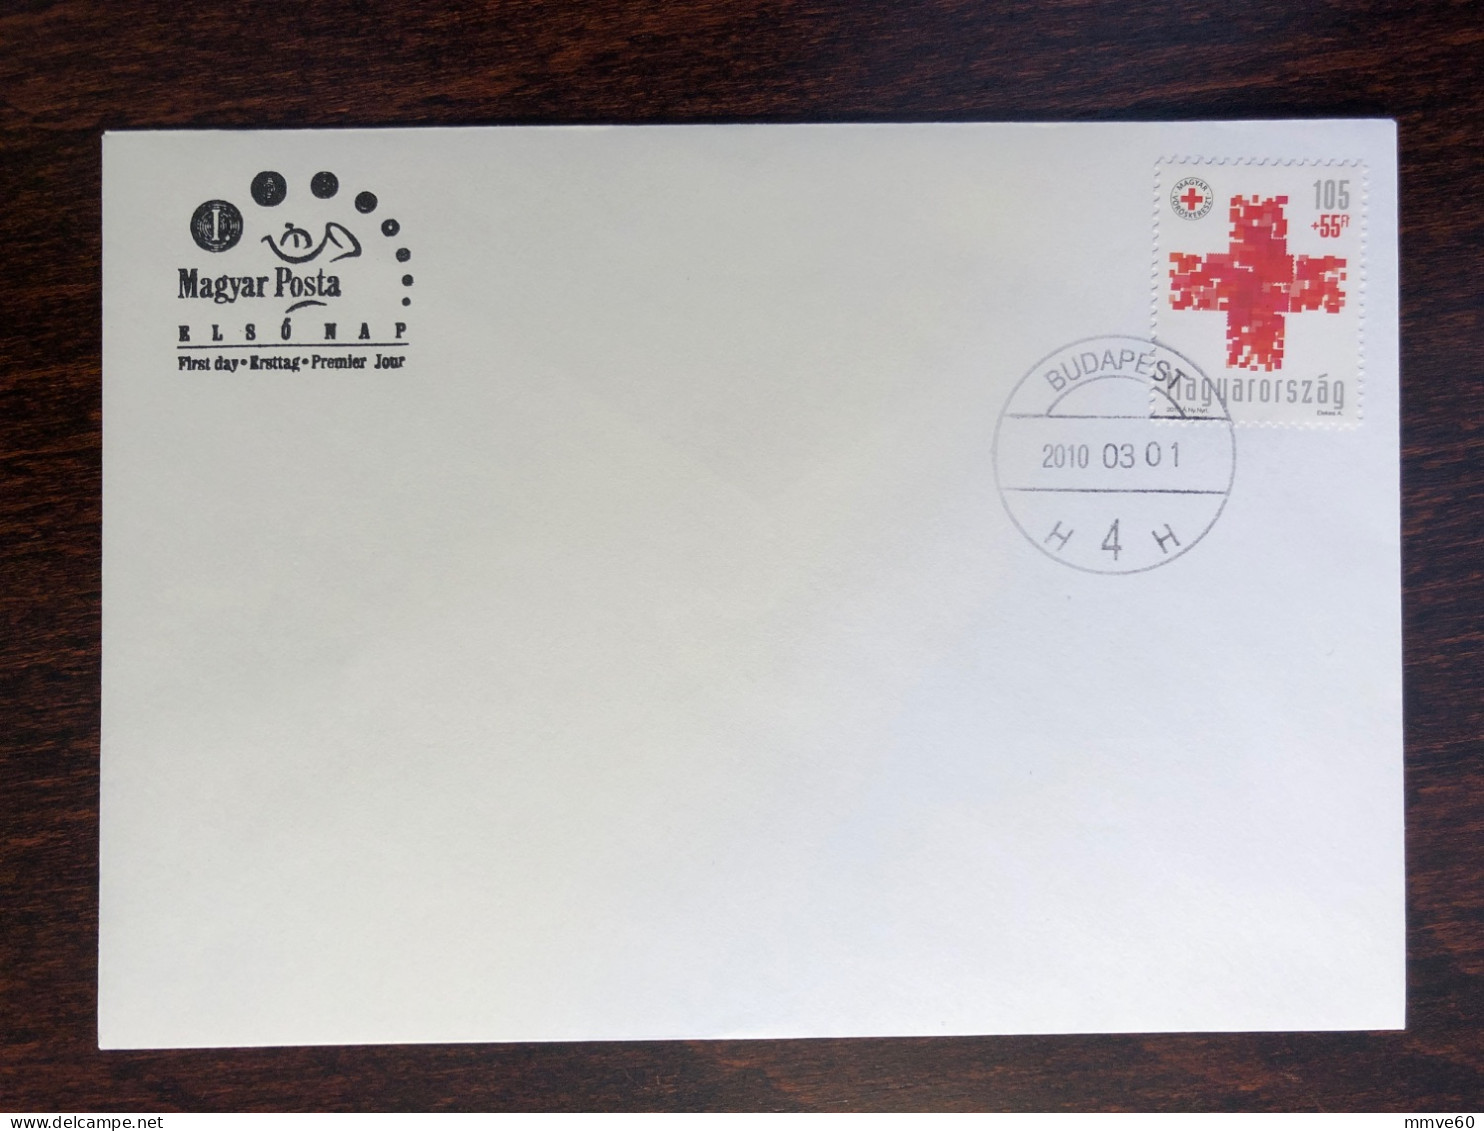 HUNGARY FDC COVER 2010 RED CROSS YEAR BRAILLE BLINDNESS BLIND HEALTH MEDICINE STAMPS - FDC